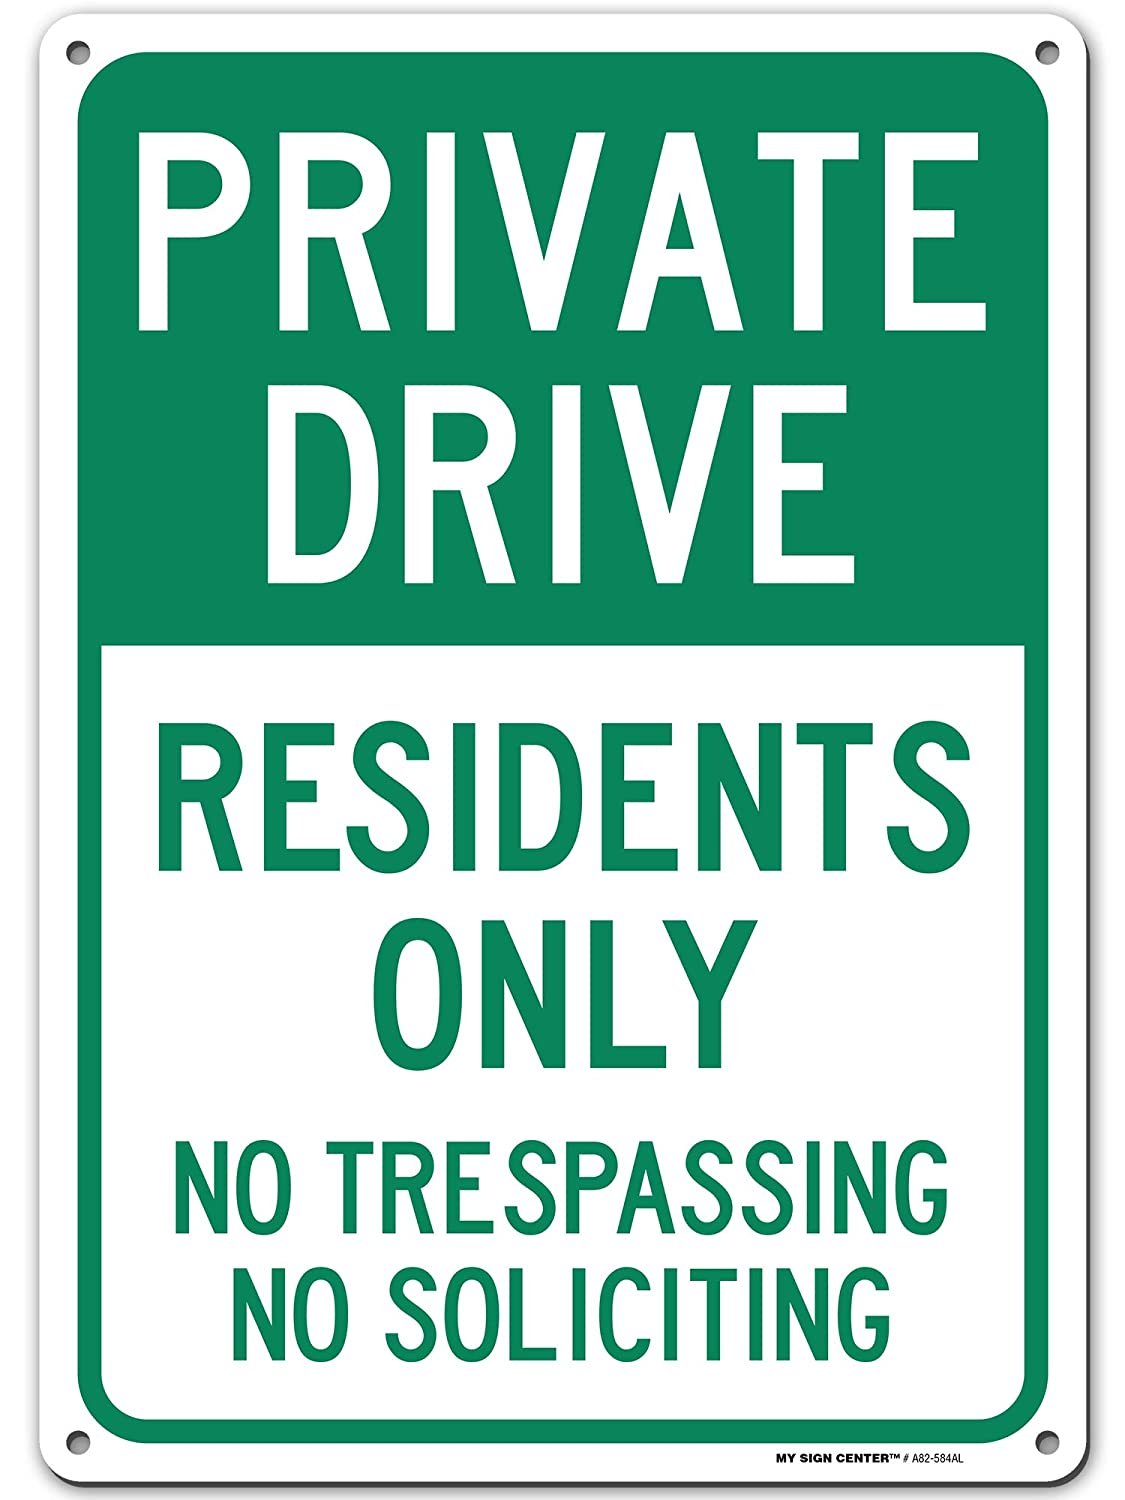 Private Driveway Resident Parking Only, No Soliciting No Trespassing Sign